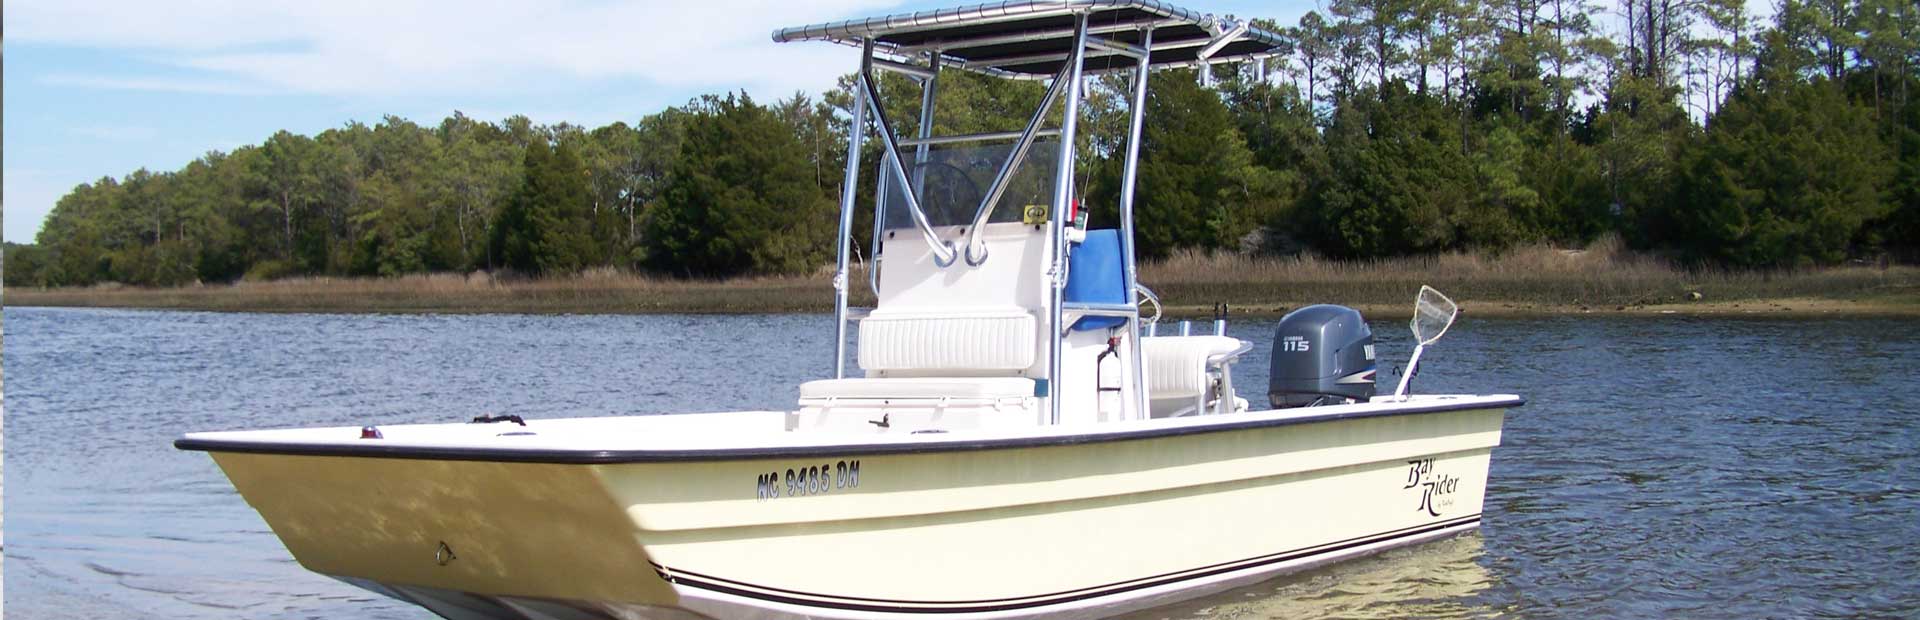 Center Console Fishing Boat on a lake.